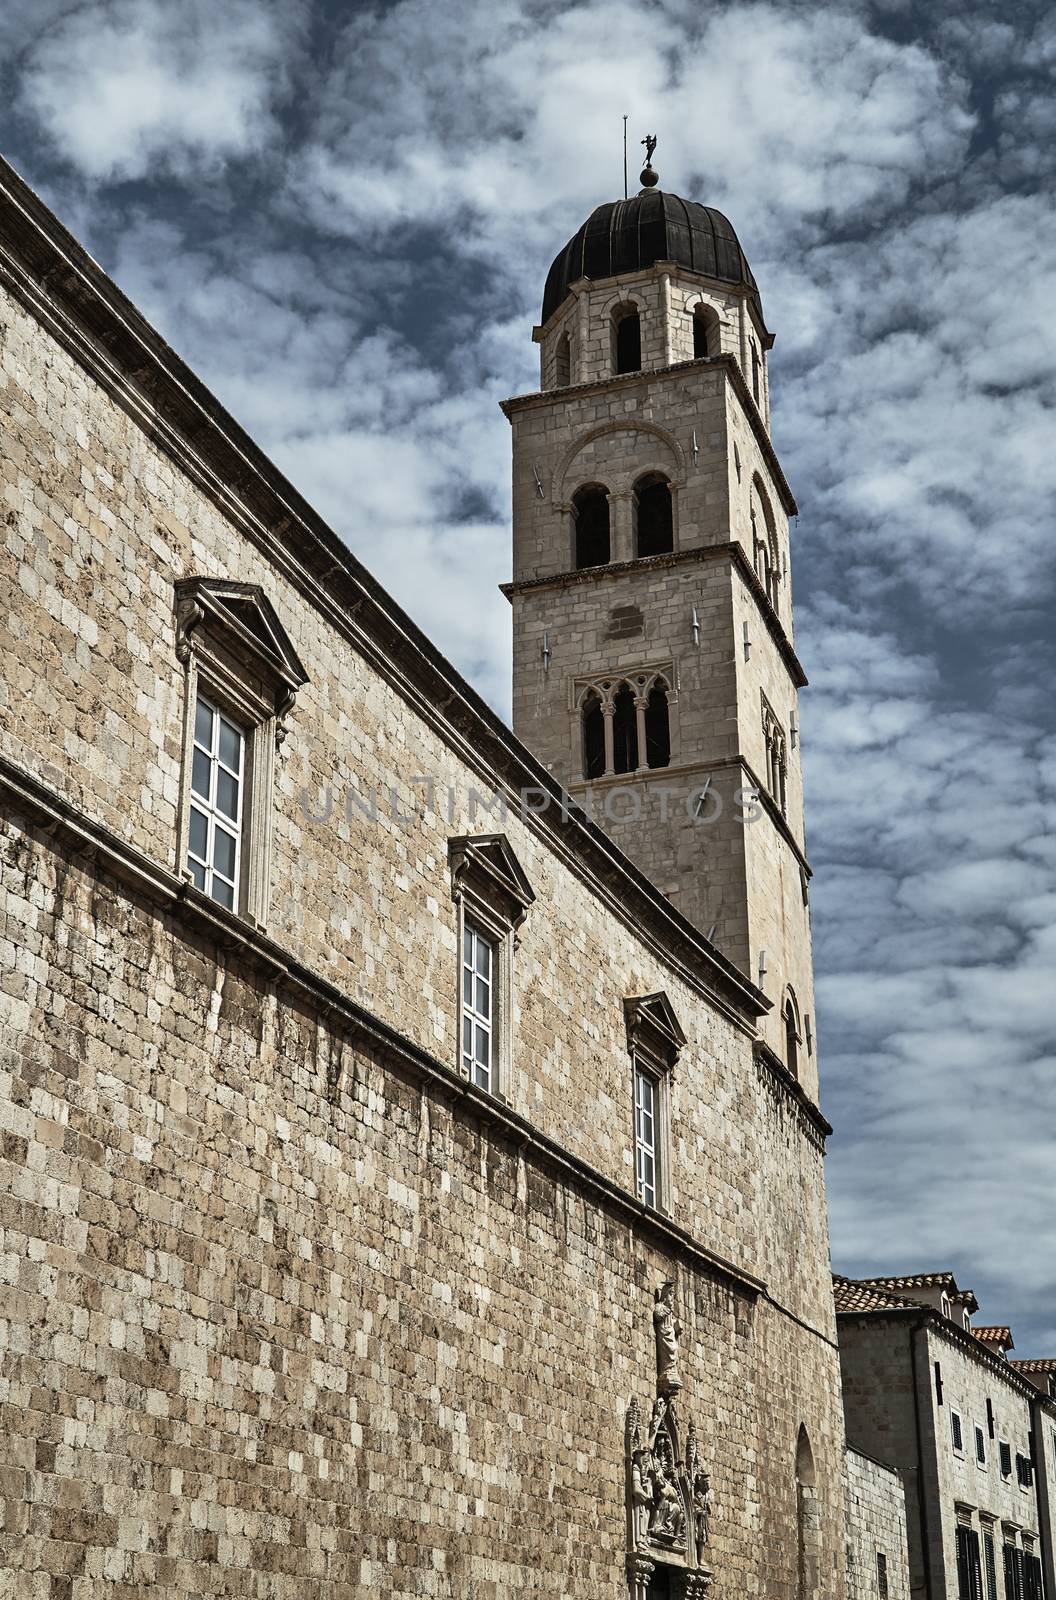 medieval church with belfry in the city of Dubrovnik in Croatia